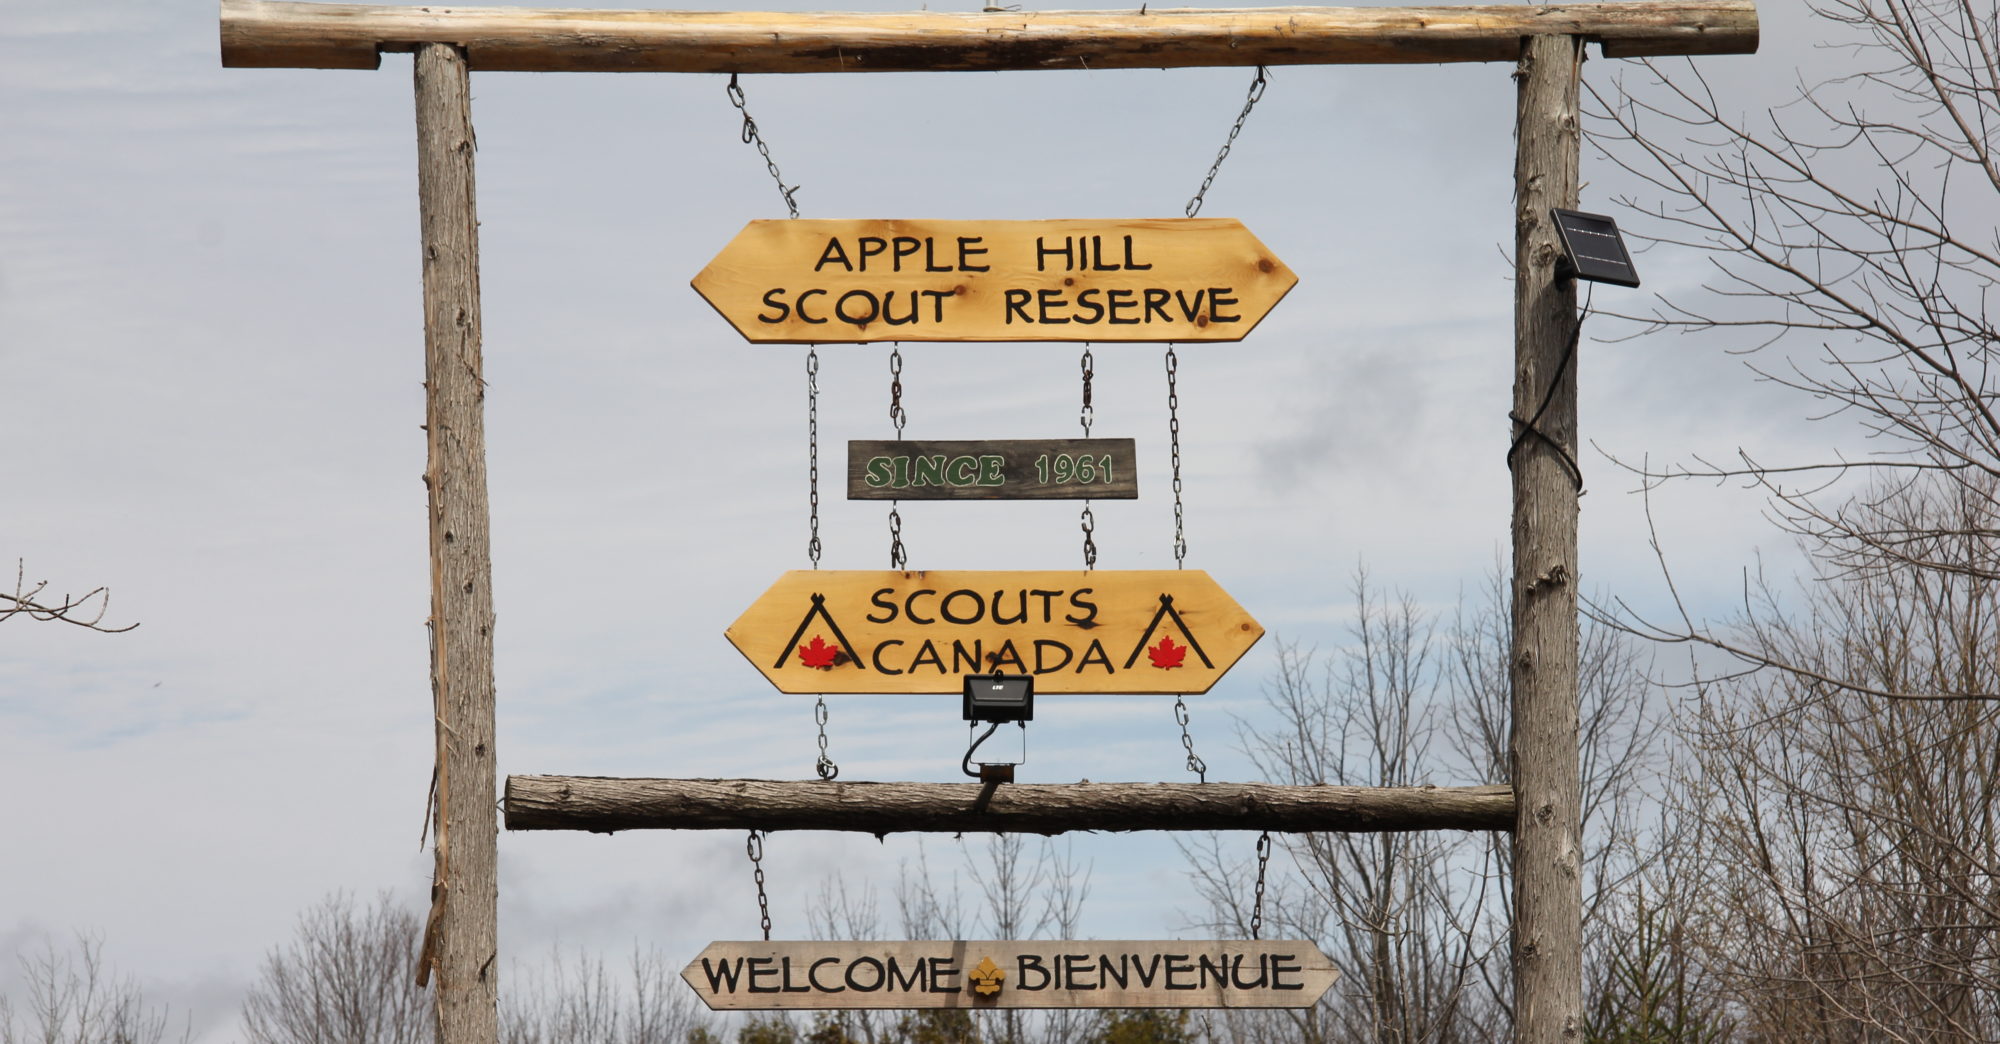 Apple Hill Scout Reserve